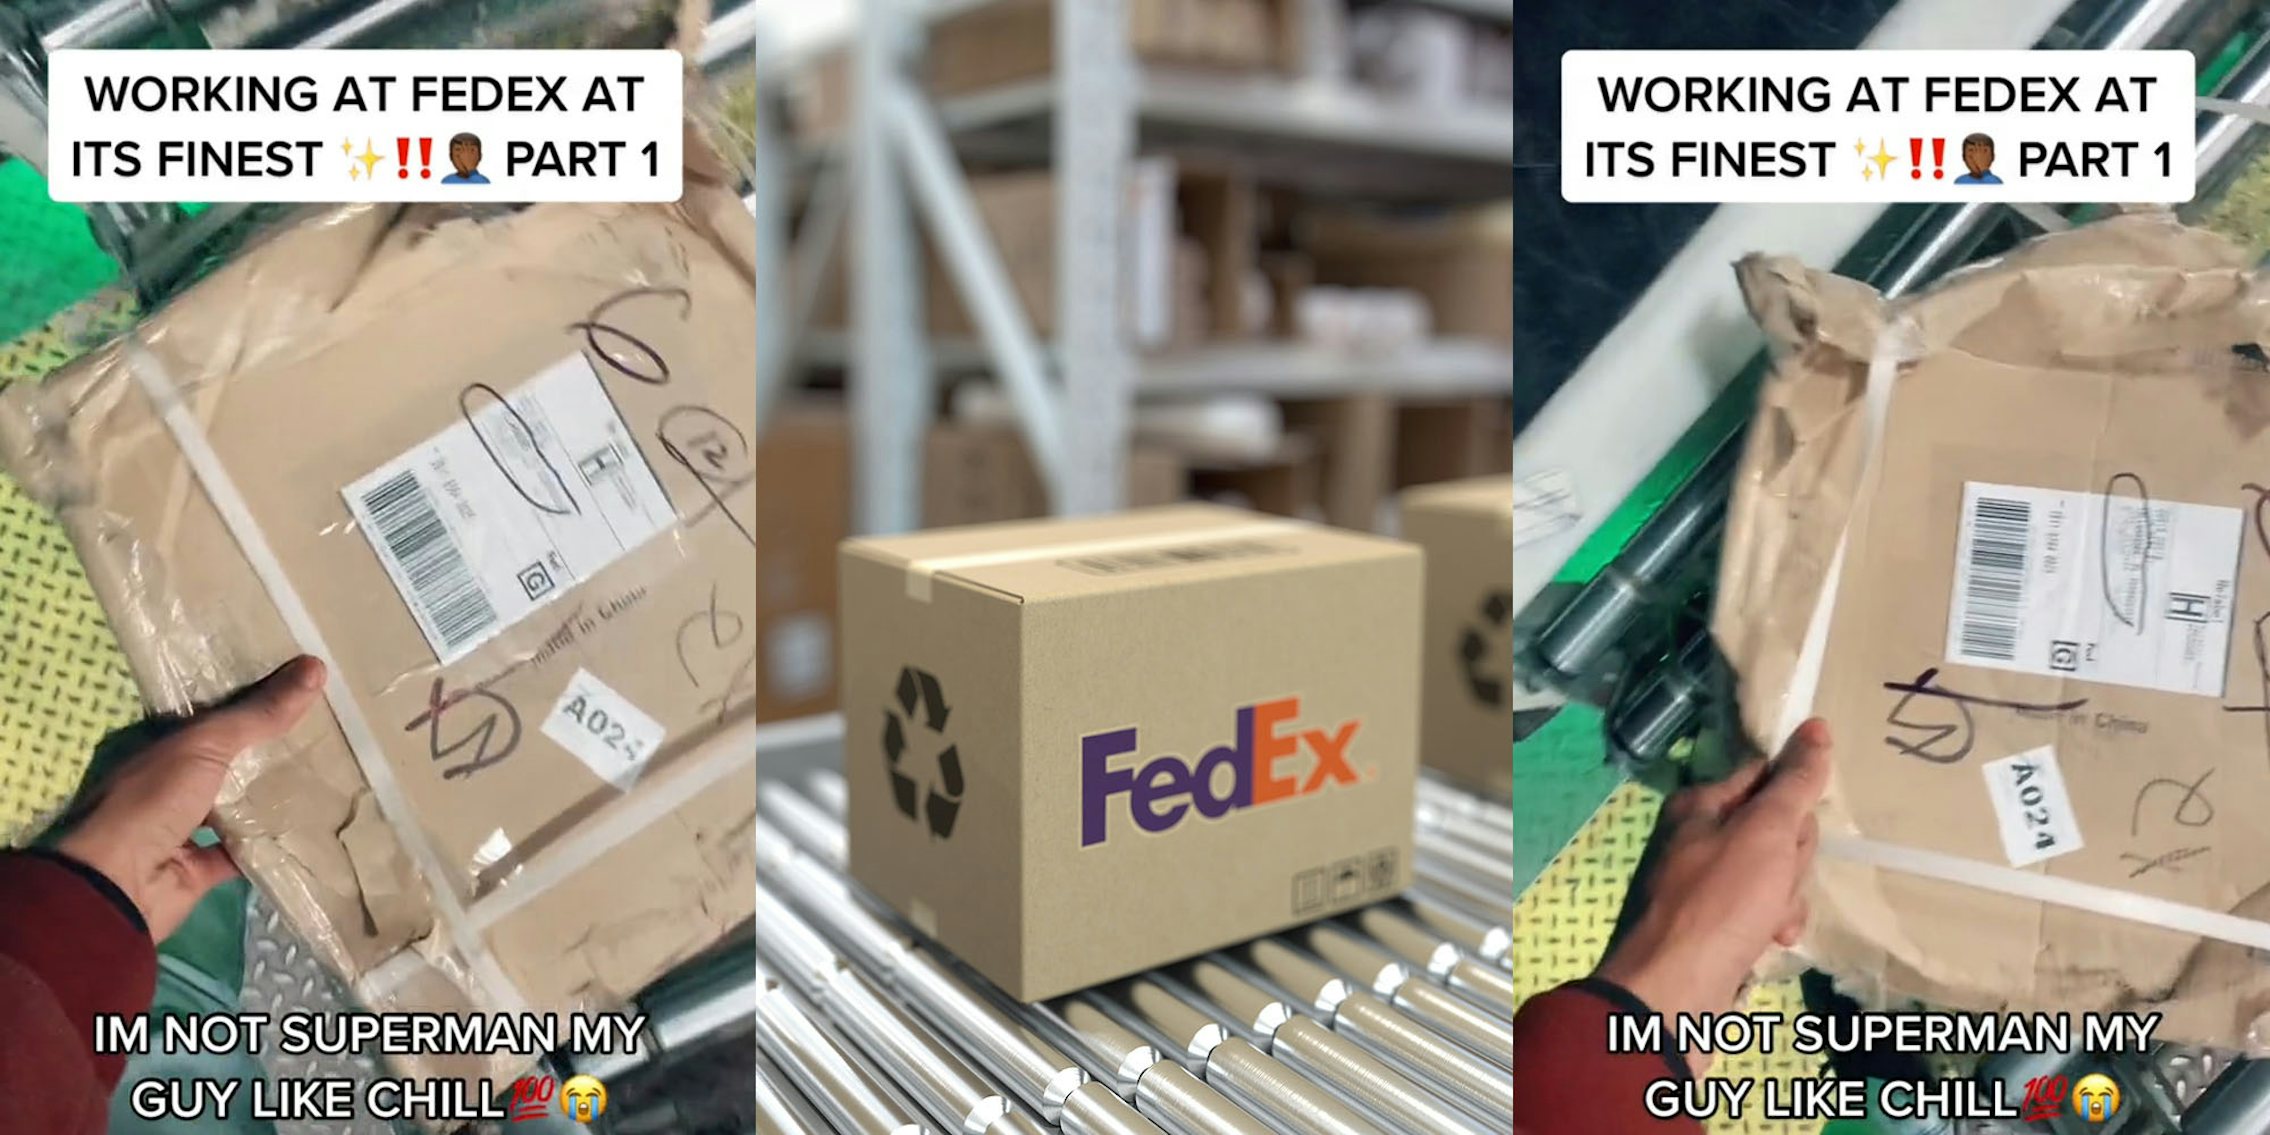 FedEx worker holding heavy package caption 'WORKING AT FEDEX AT ITS FINEST PART 1 IM NOT SUPERMAN MY GUY LIKE CHILL' (l) FedEx package on conveyer belt (c) FedEx worker holding heavy package caption 'WORKING AT FEDEX AT ITS FINEST PART 1 IM NOT SUPERMAN MY GUY LIKE CHILL' (r)